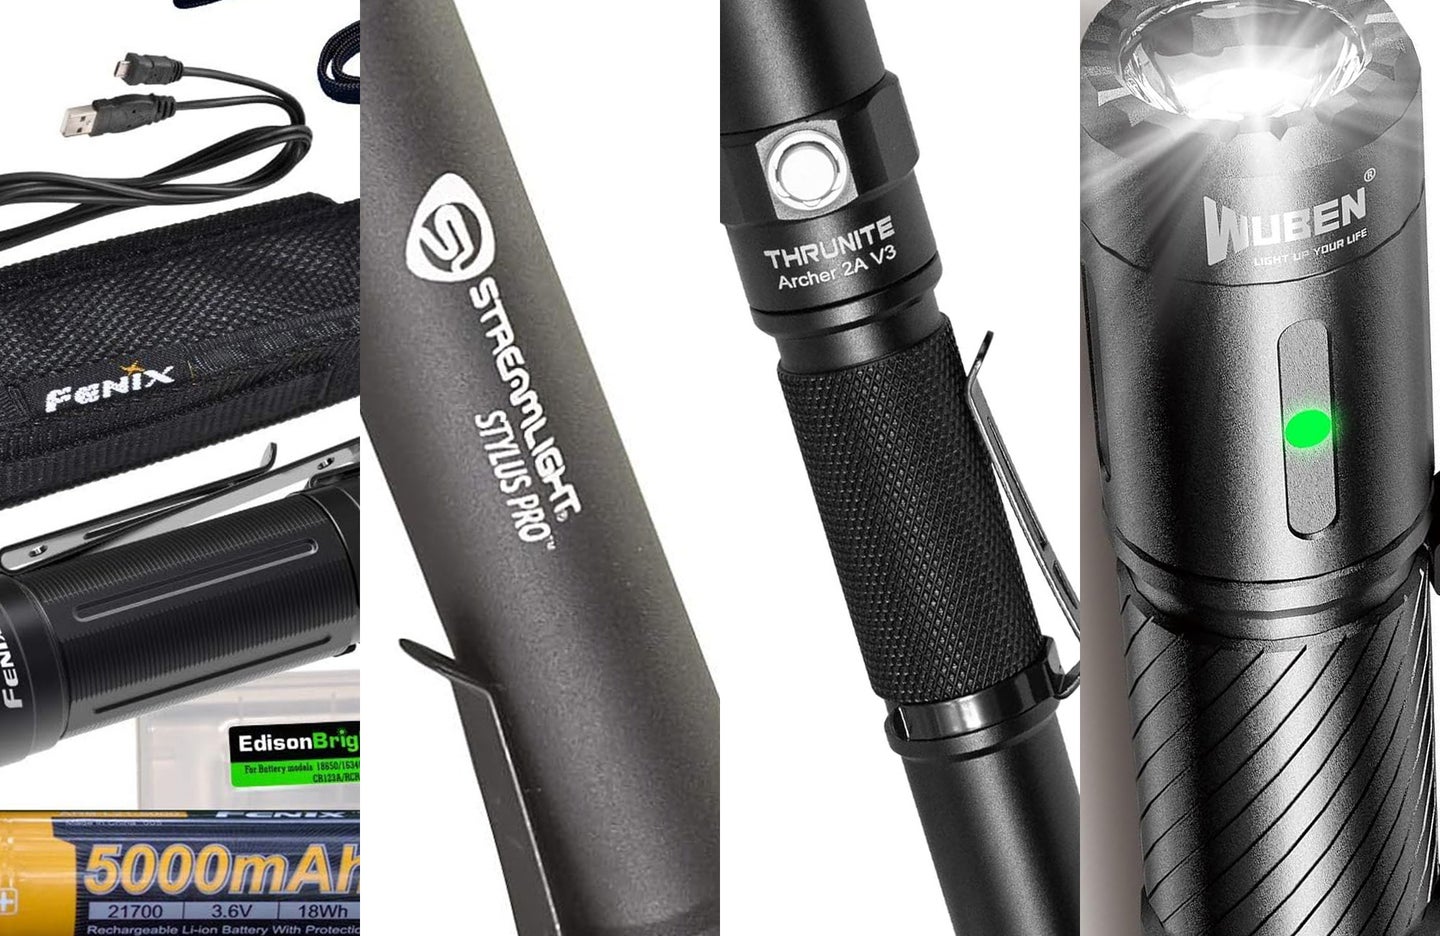 Four of the best flashlights on a plain background